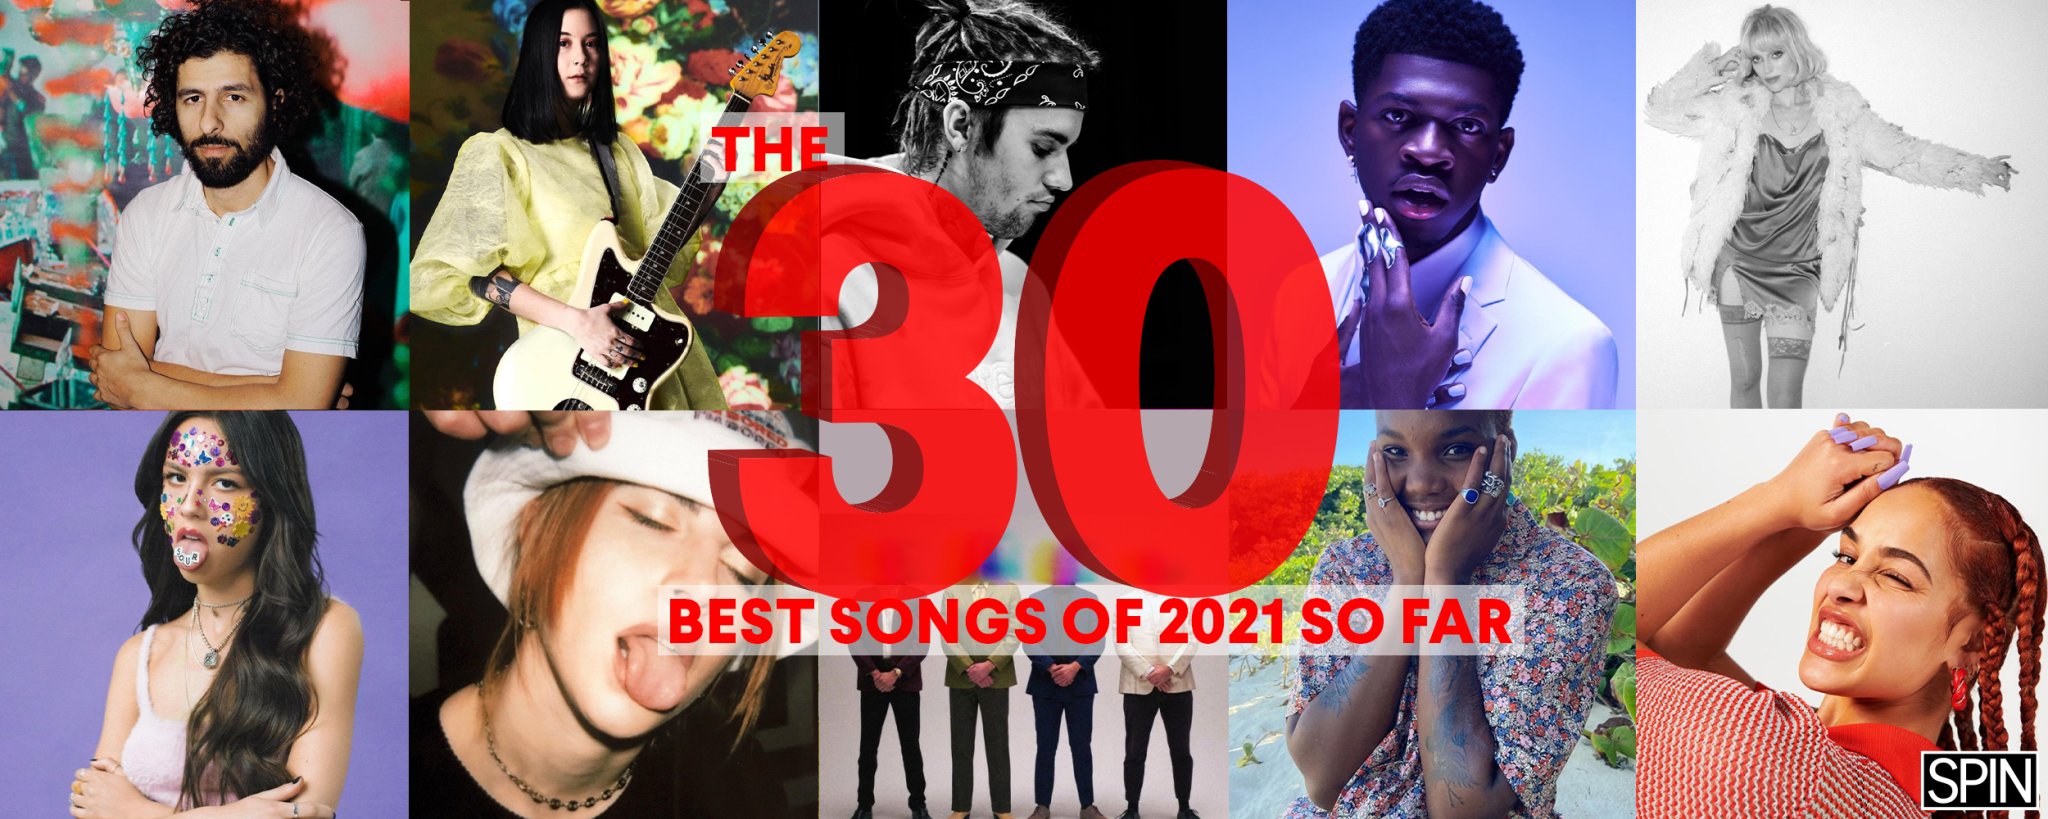 The best songs of the year